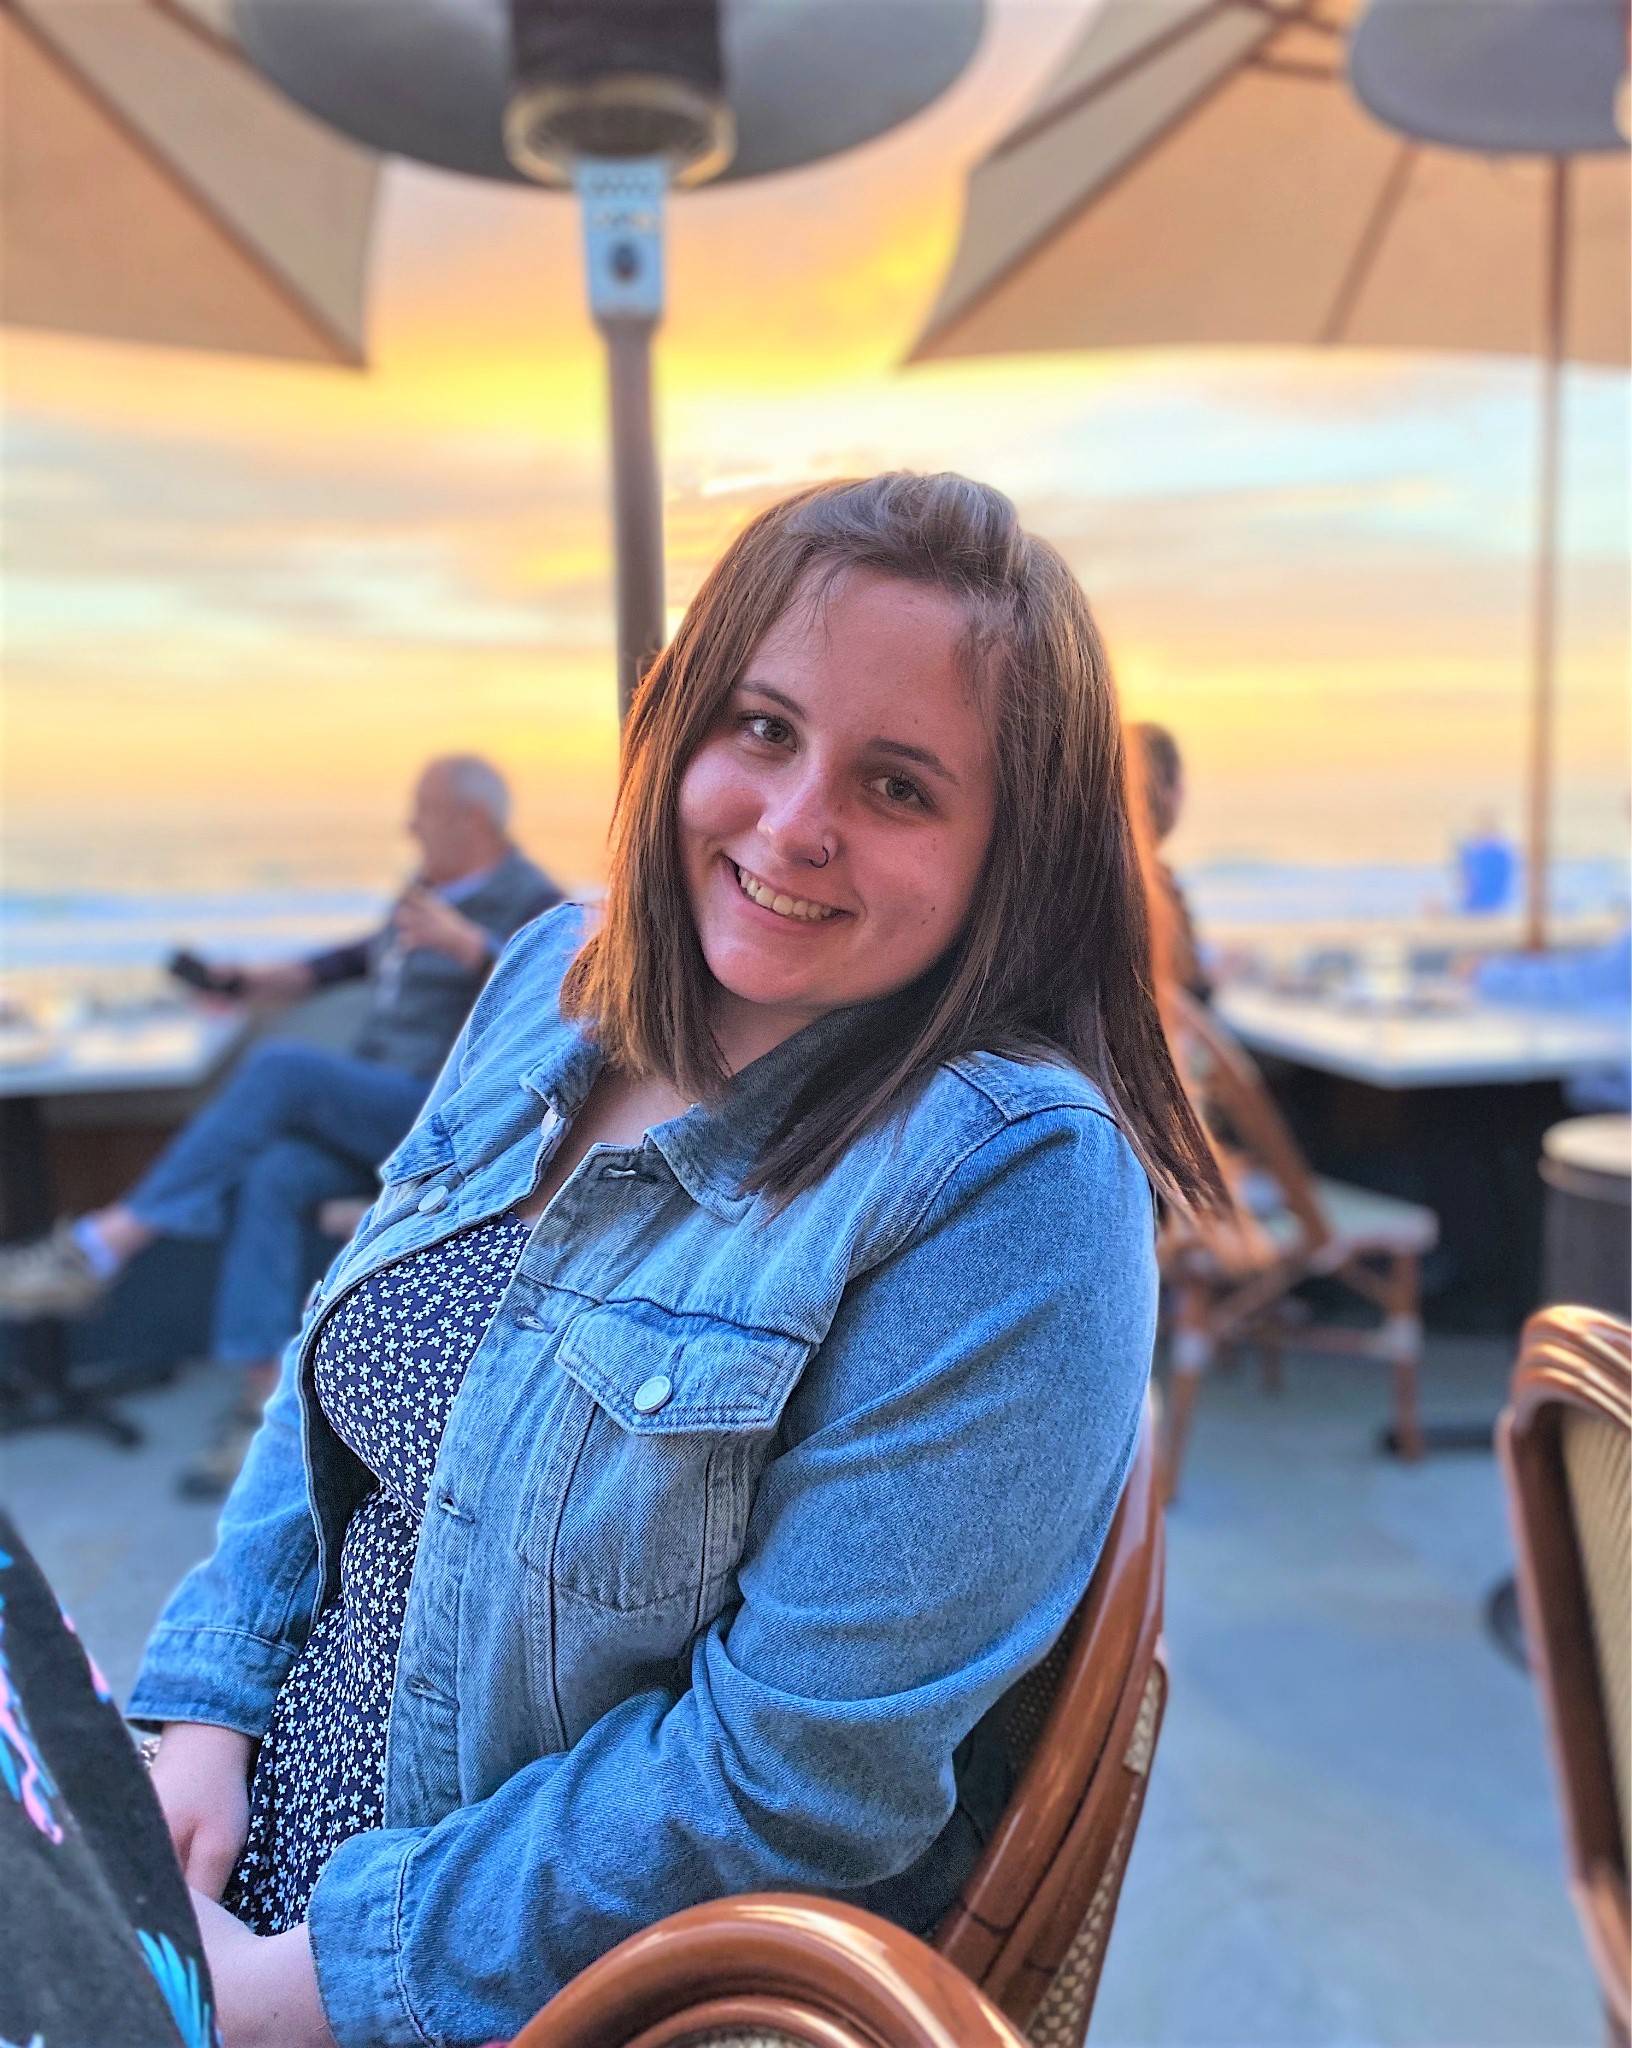 Woman with shoulder length brown hair wearing jean jacket by a table with a sunset beach in the background